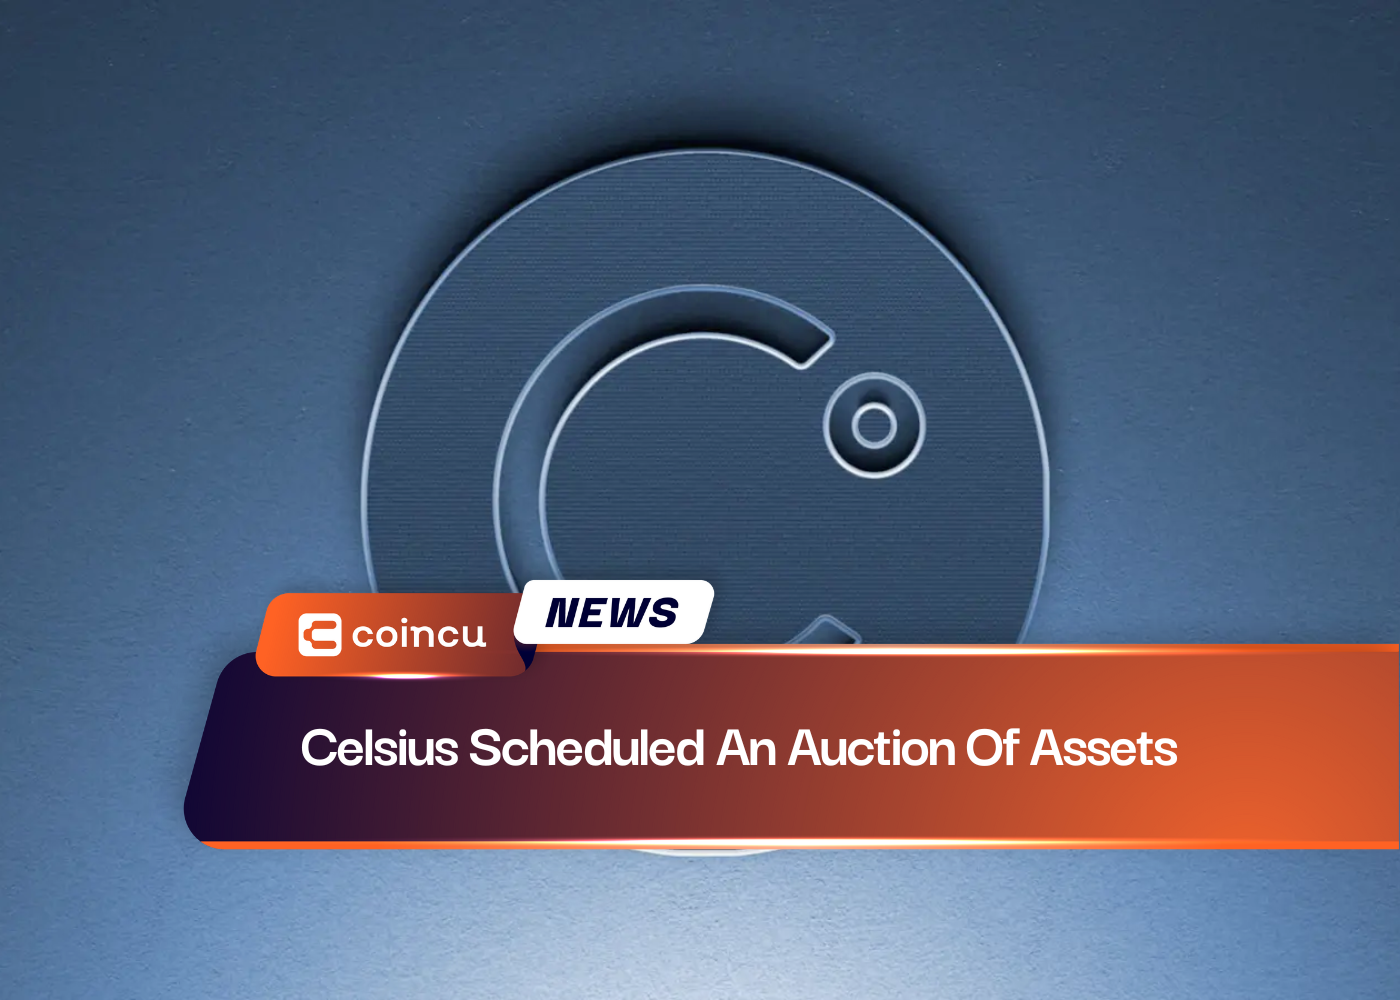 Celsius Scheduled An Auction Of Assets